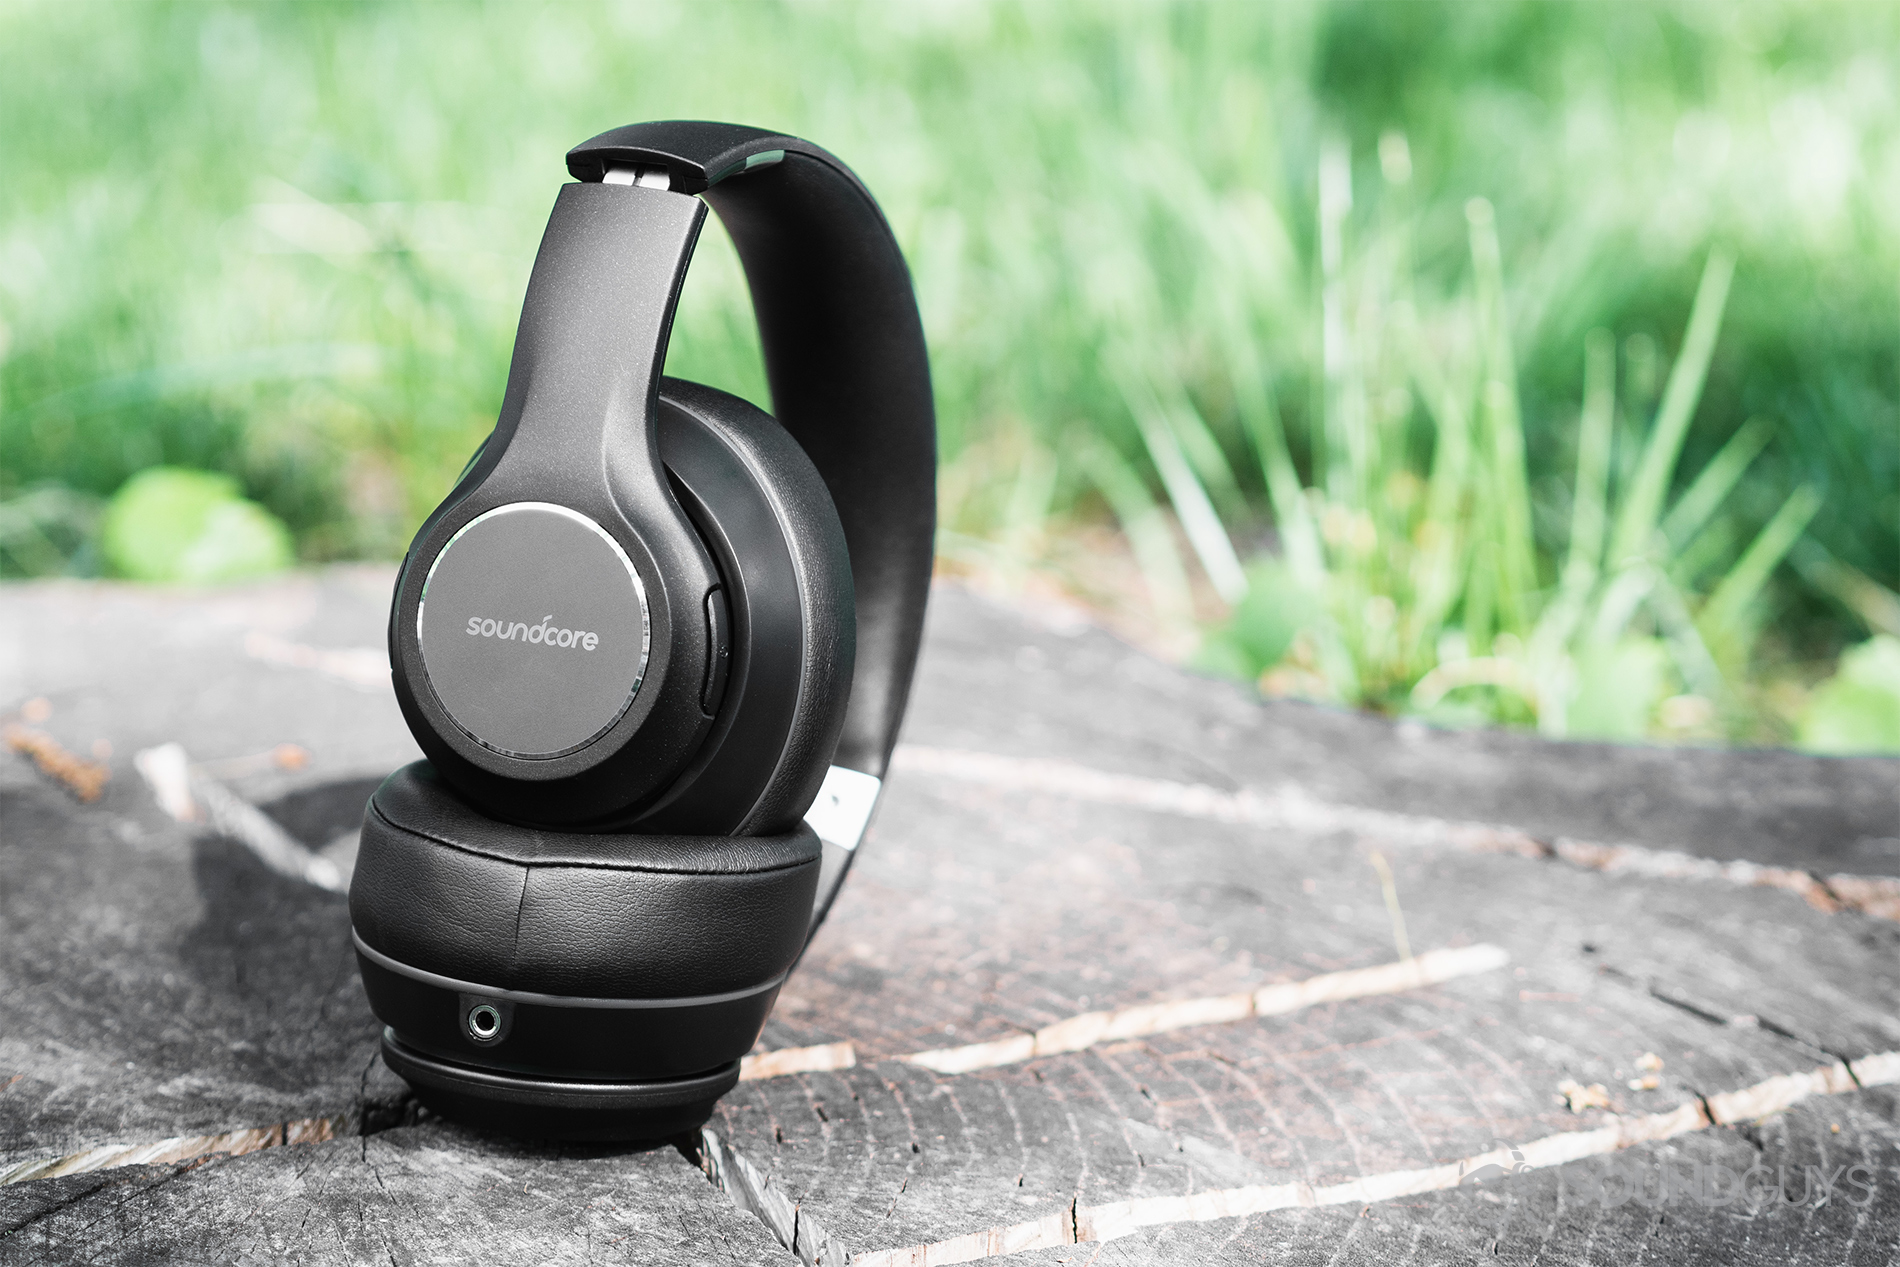 Anker Soundcore Vortex review: The headphones offset to the left on a carved tree stump with a lush, green grass background.